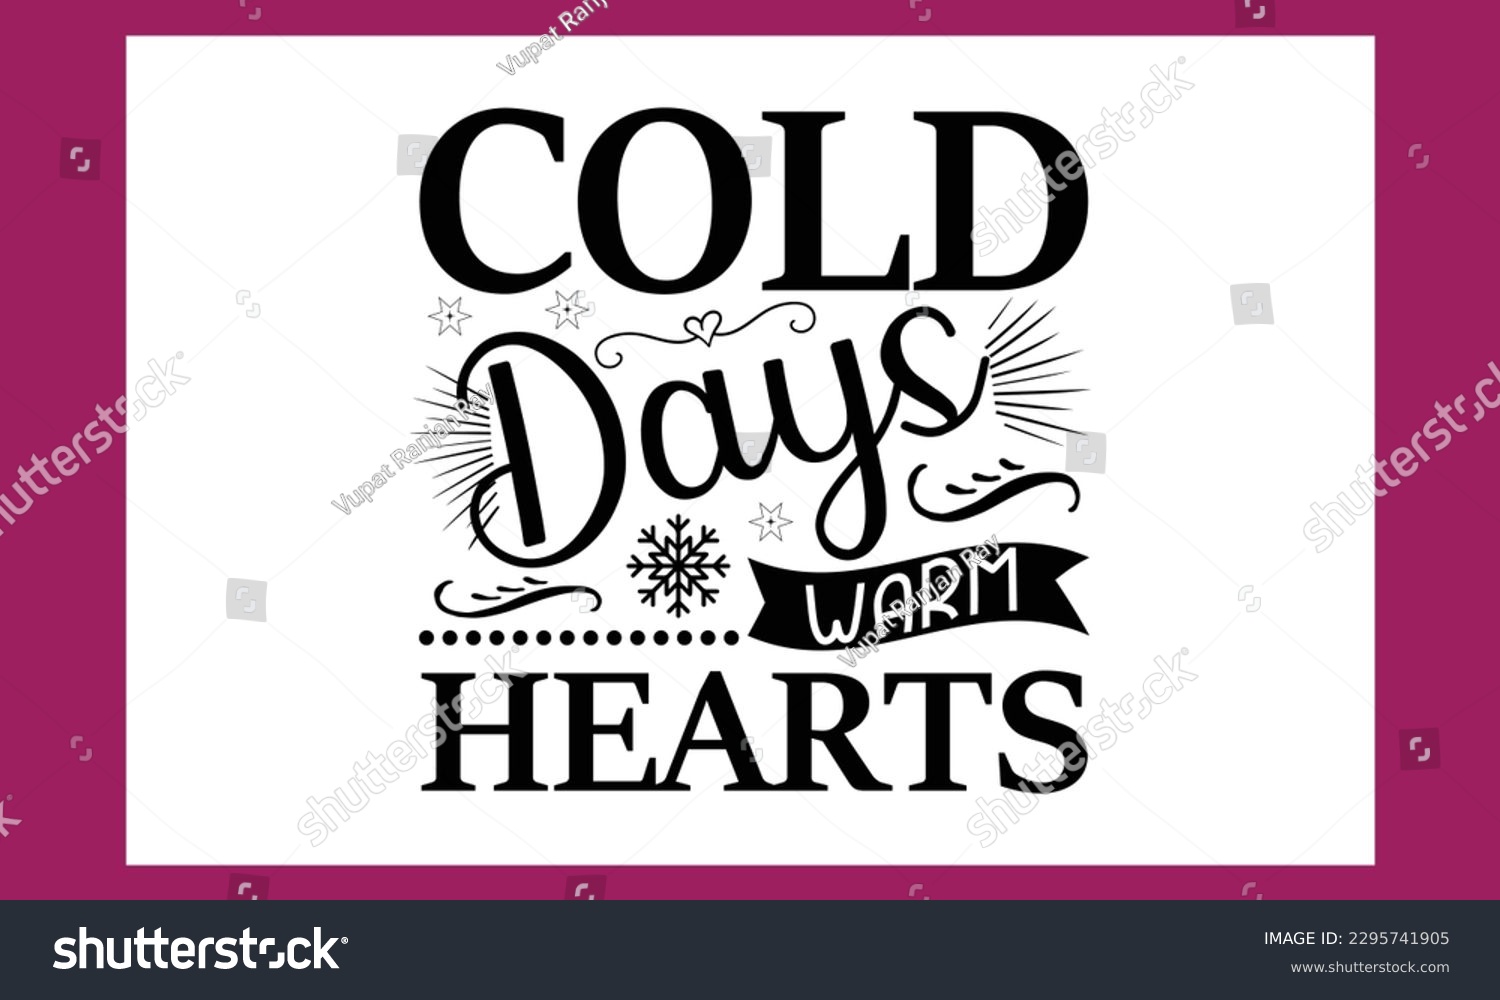 SVG of Cold Days Warm Hearts  Svg Free File Design.Try creating fun crafts and gifts for friends and family using your monogram making, t-shirt design, sign making, card making, scrapbooking, more and more svg